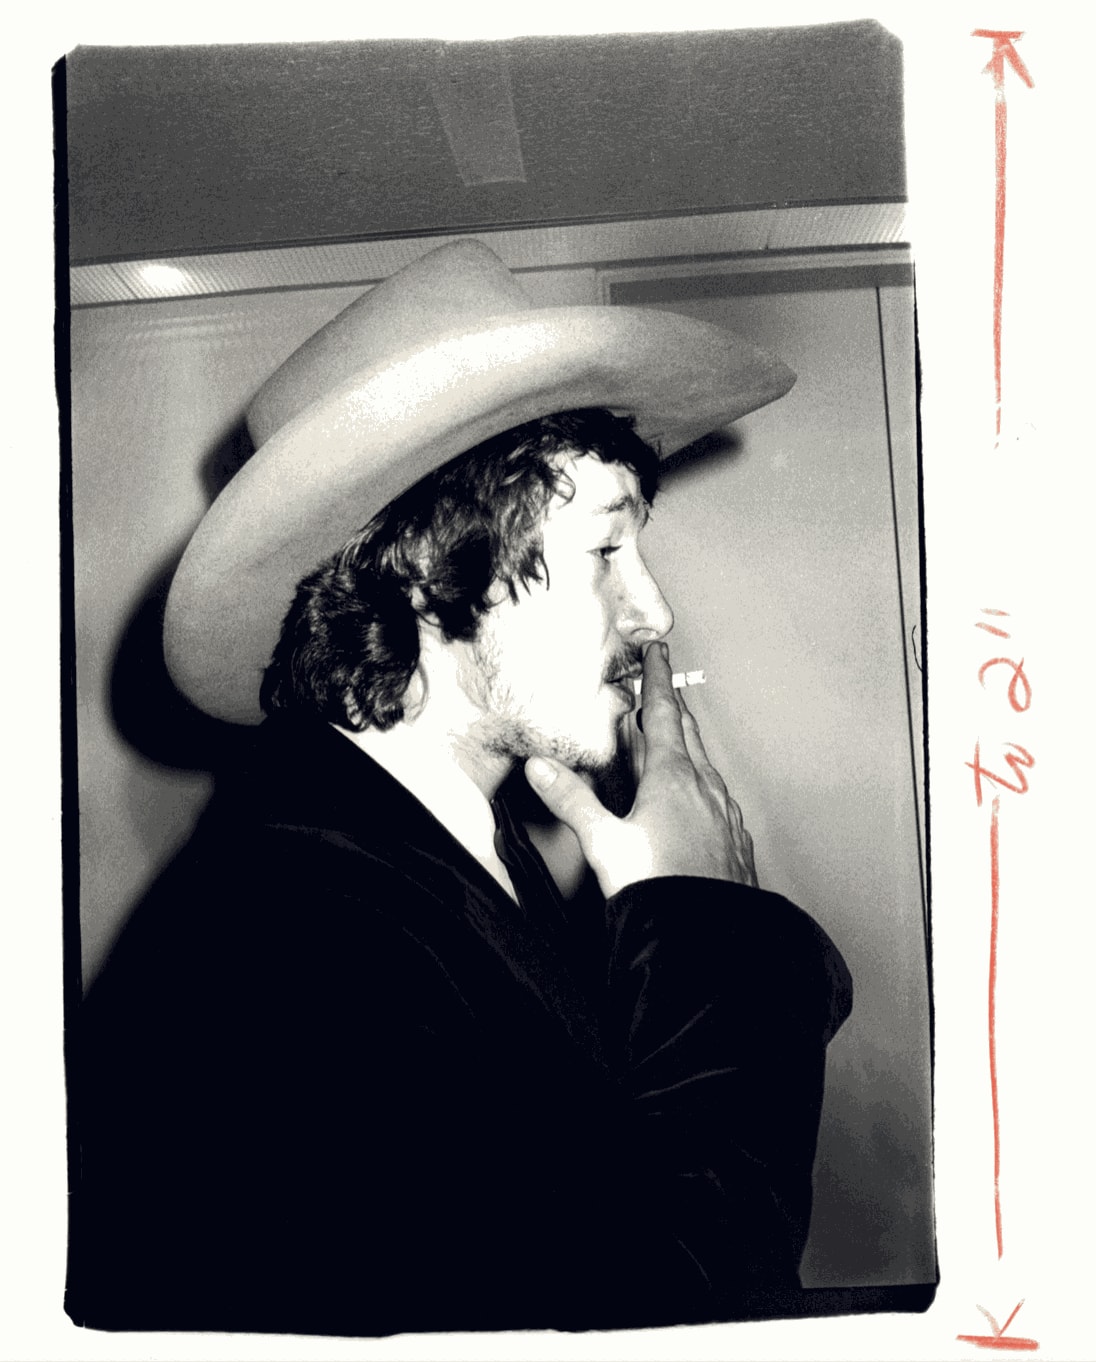 Andy Warhol, Man in a Cowboy Hat Smoking, 1970's. Silver gelatin print. 10 x 8 in. Courtesy of Hedges Projects.